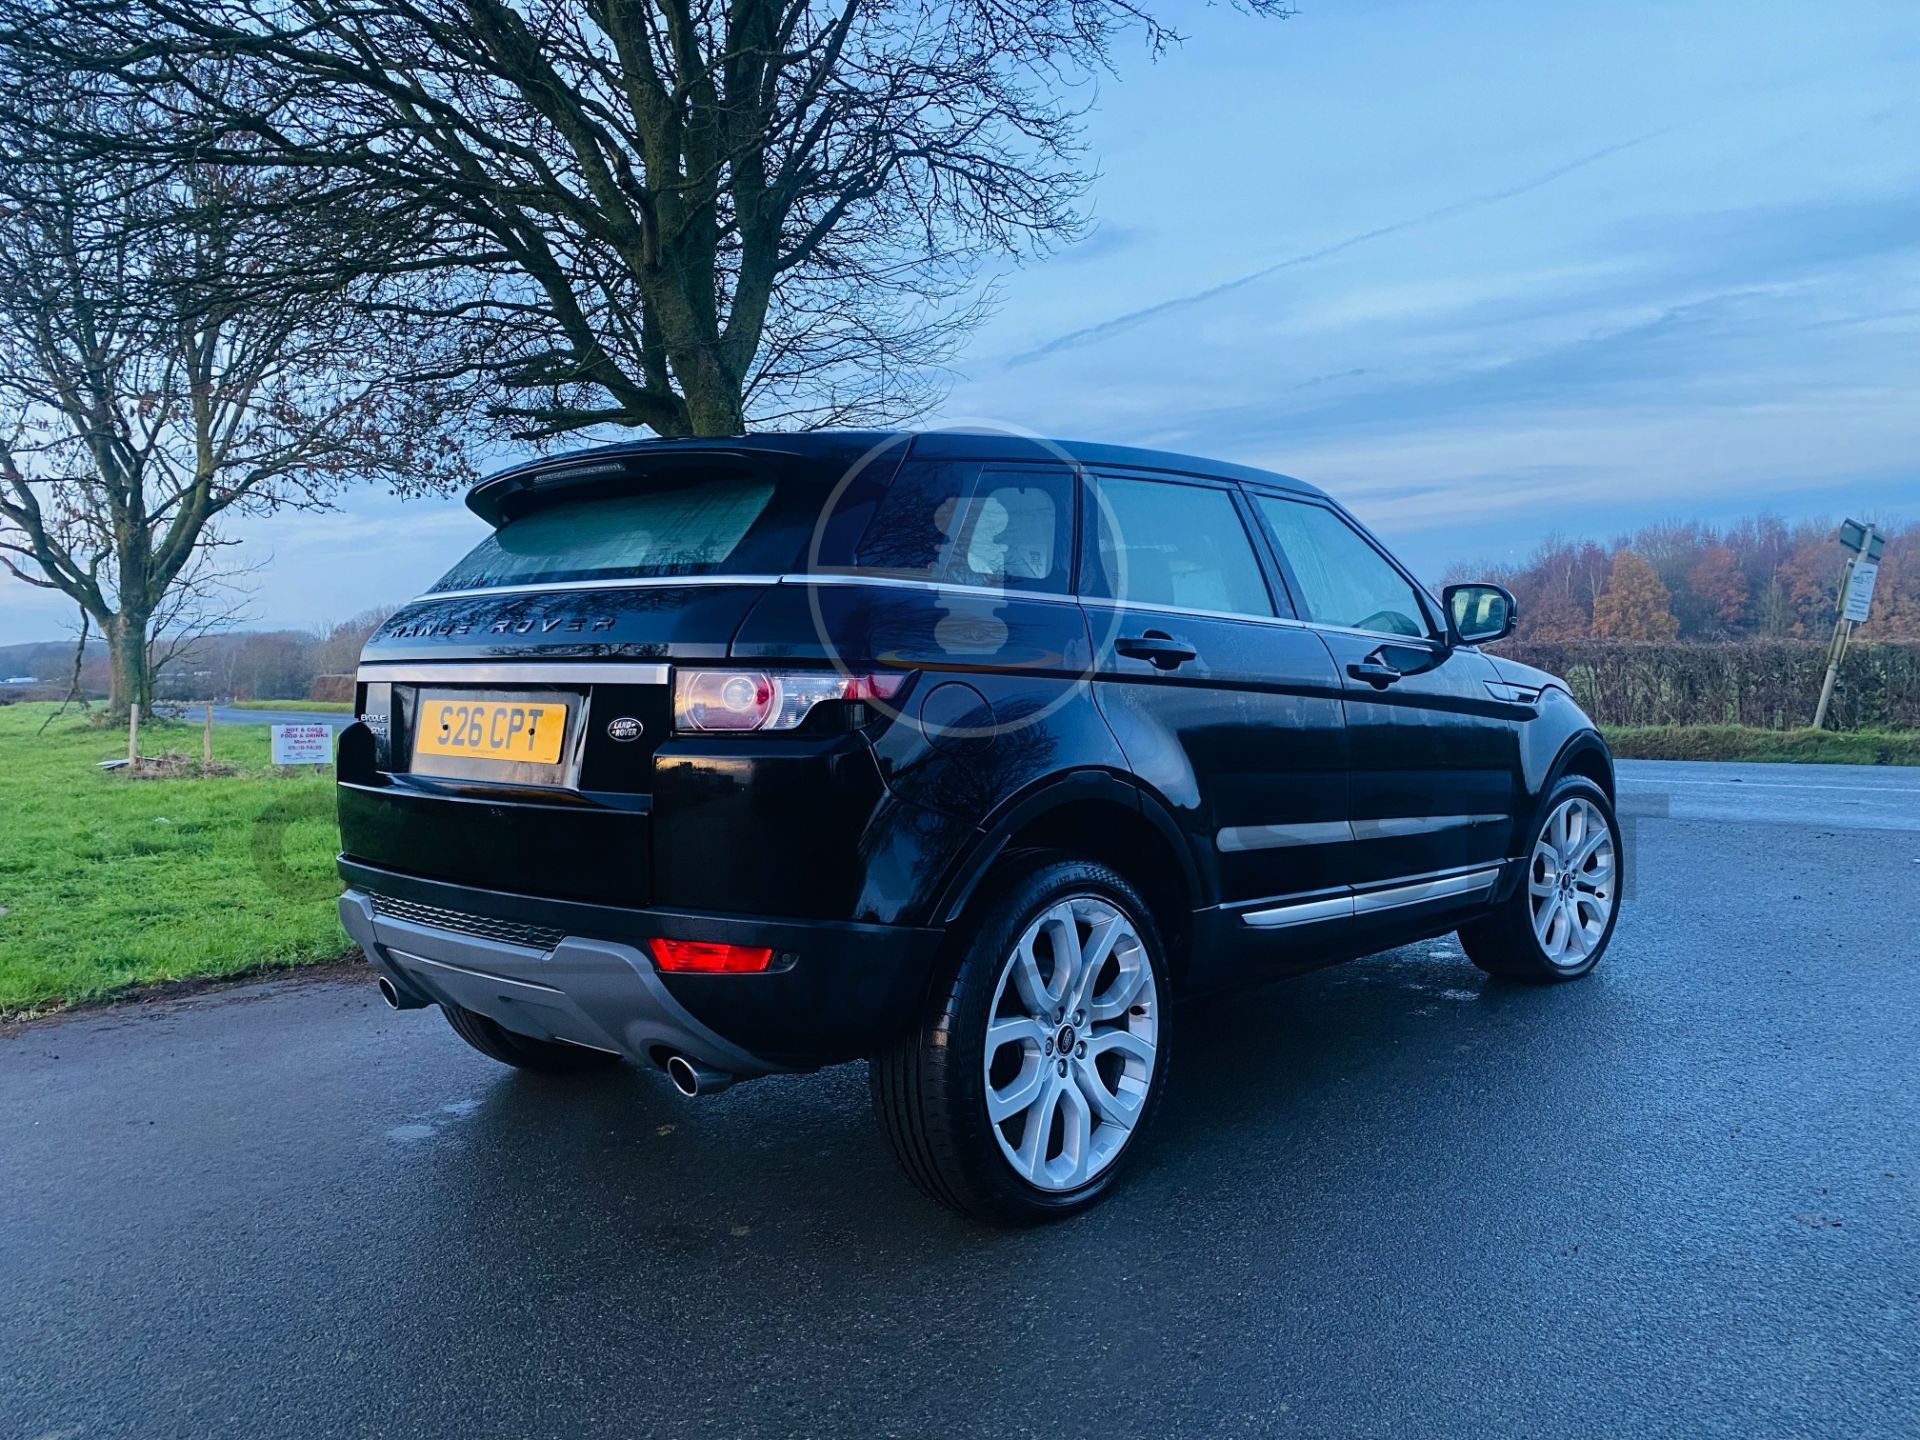 (On Sale) LAND ROVER EVOQUE PRESTIGE 2.2 STOP/START 4WD AUTO MATIC SATNAV AIRCON AND PANORAMIC ROF - Image 9 of 29